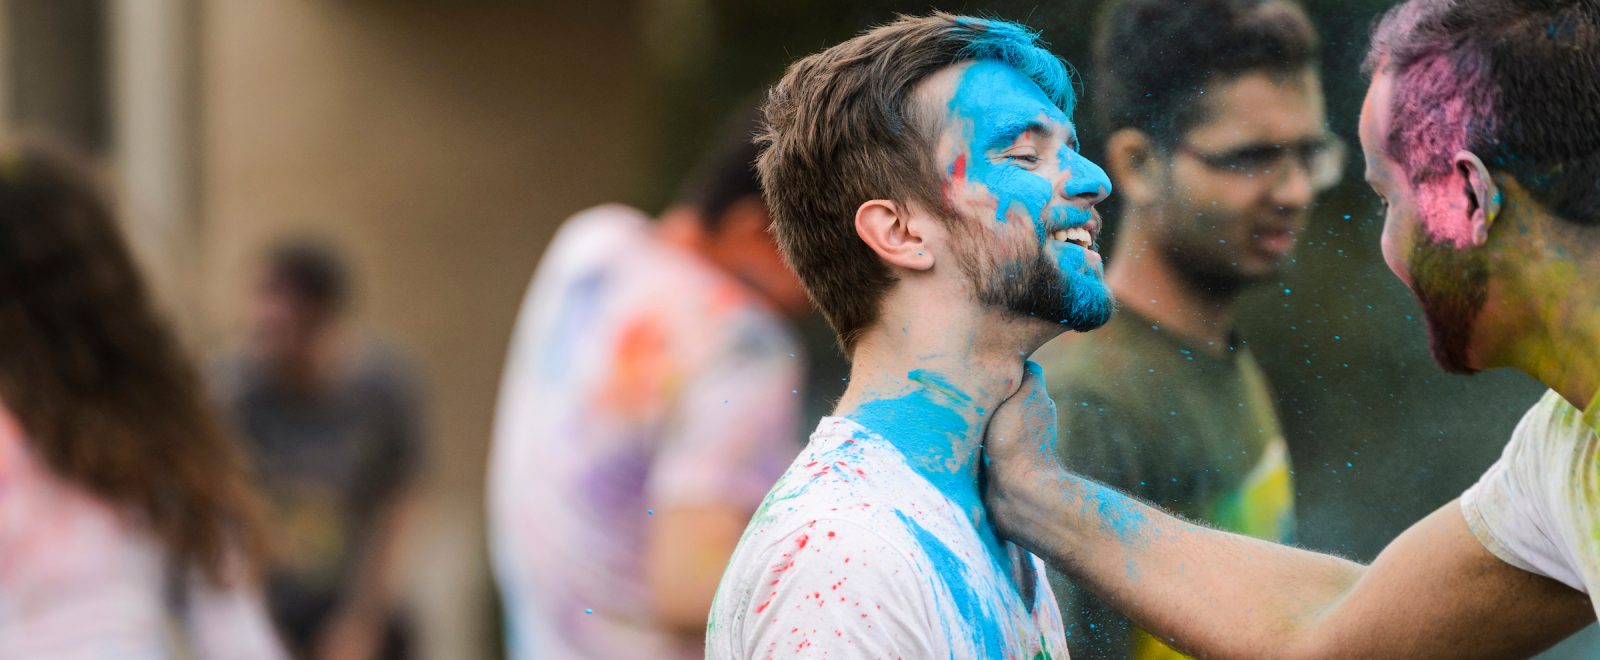 male student with blue chalked face smiles during the festival of colors, an Indian tradition.